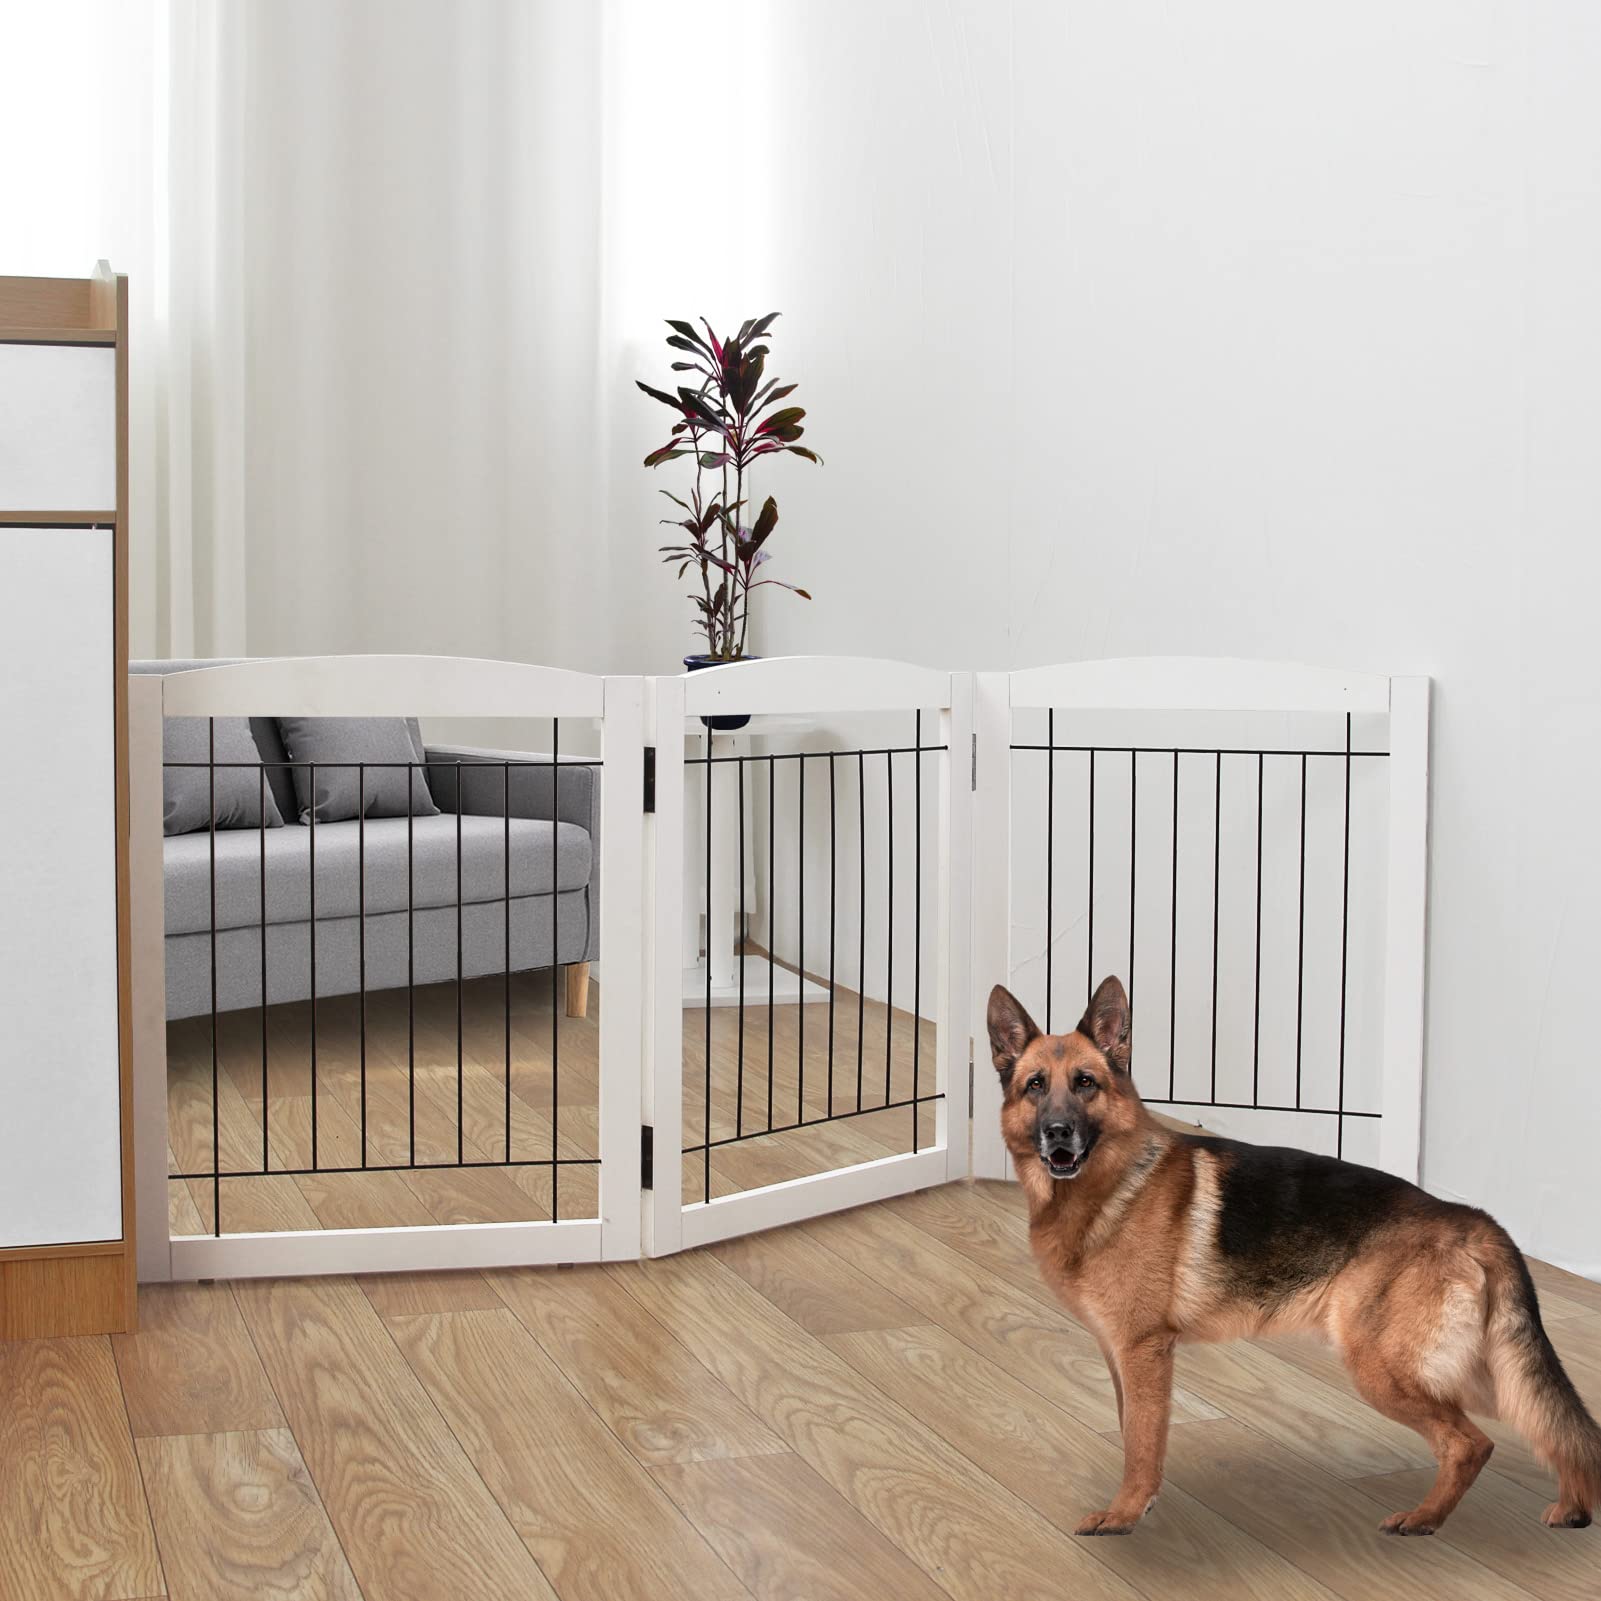 ZJSF Freestanding Foldable Dog Gate for House Extra Wide Wooden White Indoor Puppy Gate Stairs Dog Gates Doorways Pet Gate Tall 